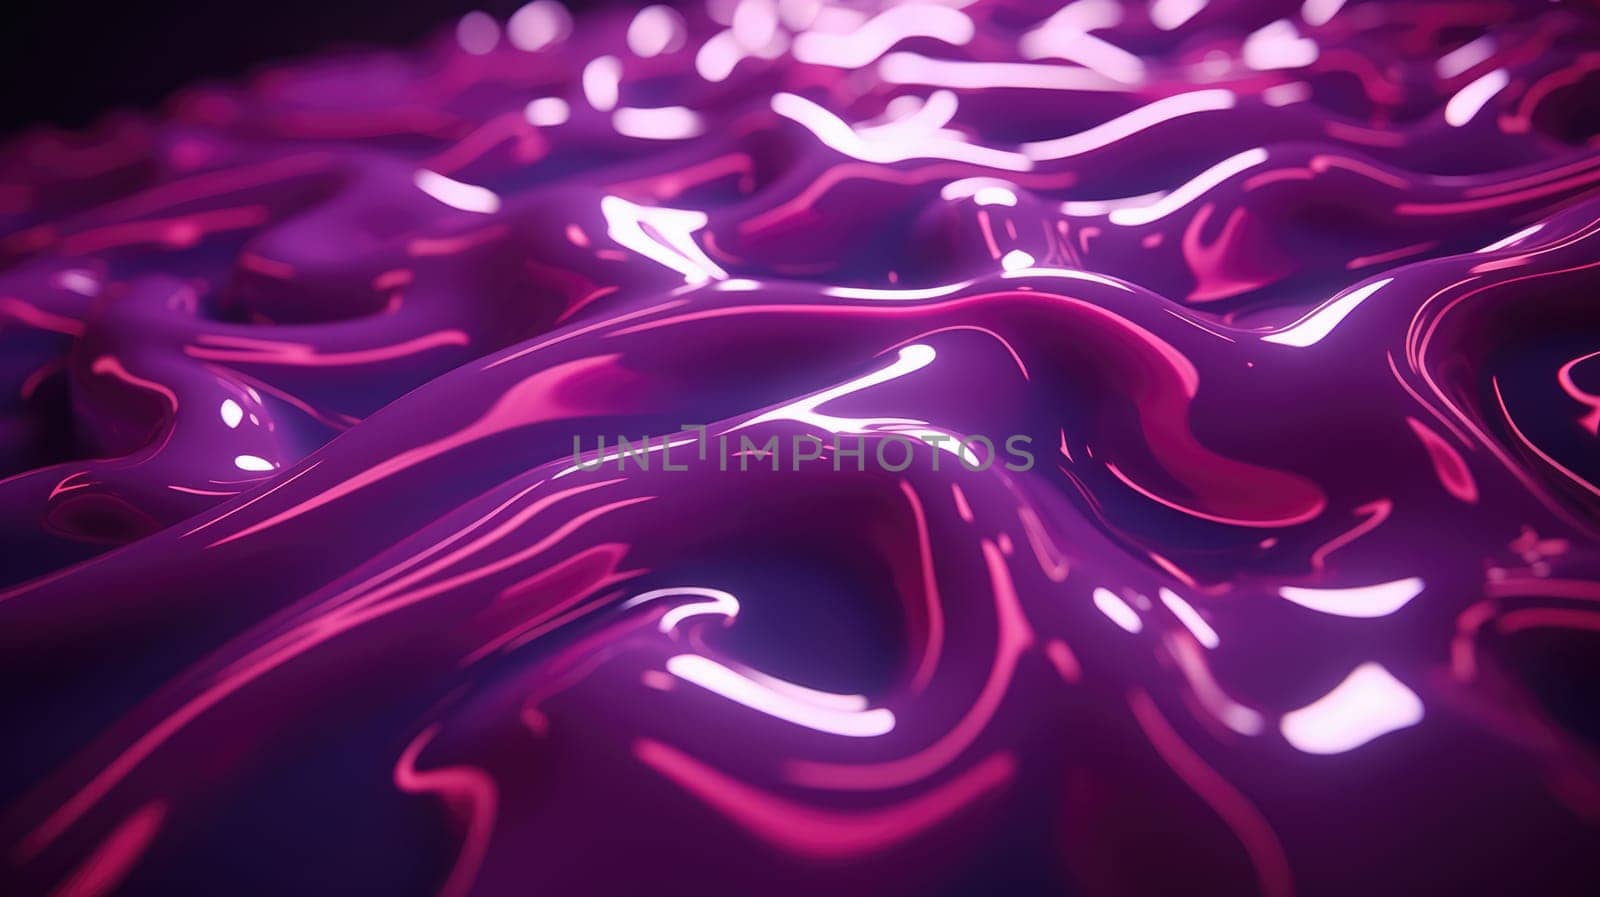 Abstract liquid background in electric neon colors. by palinchak